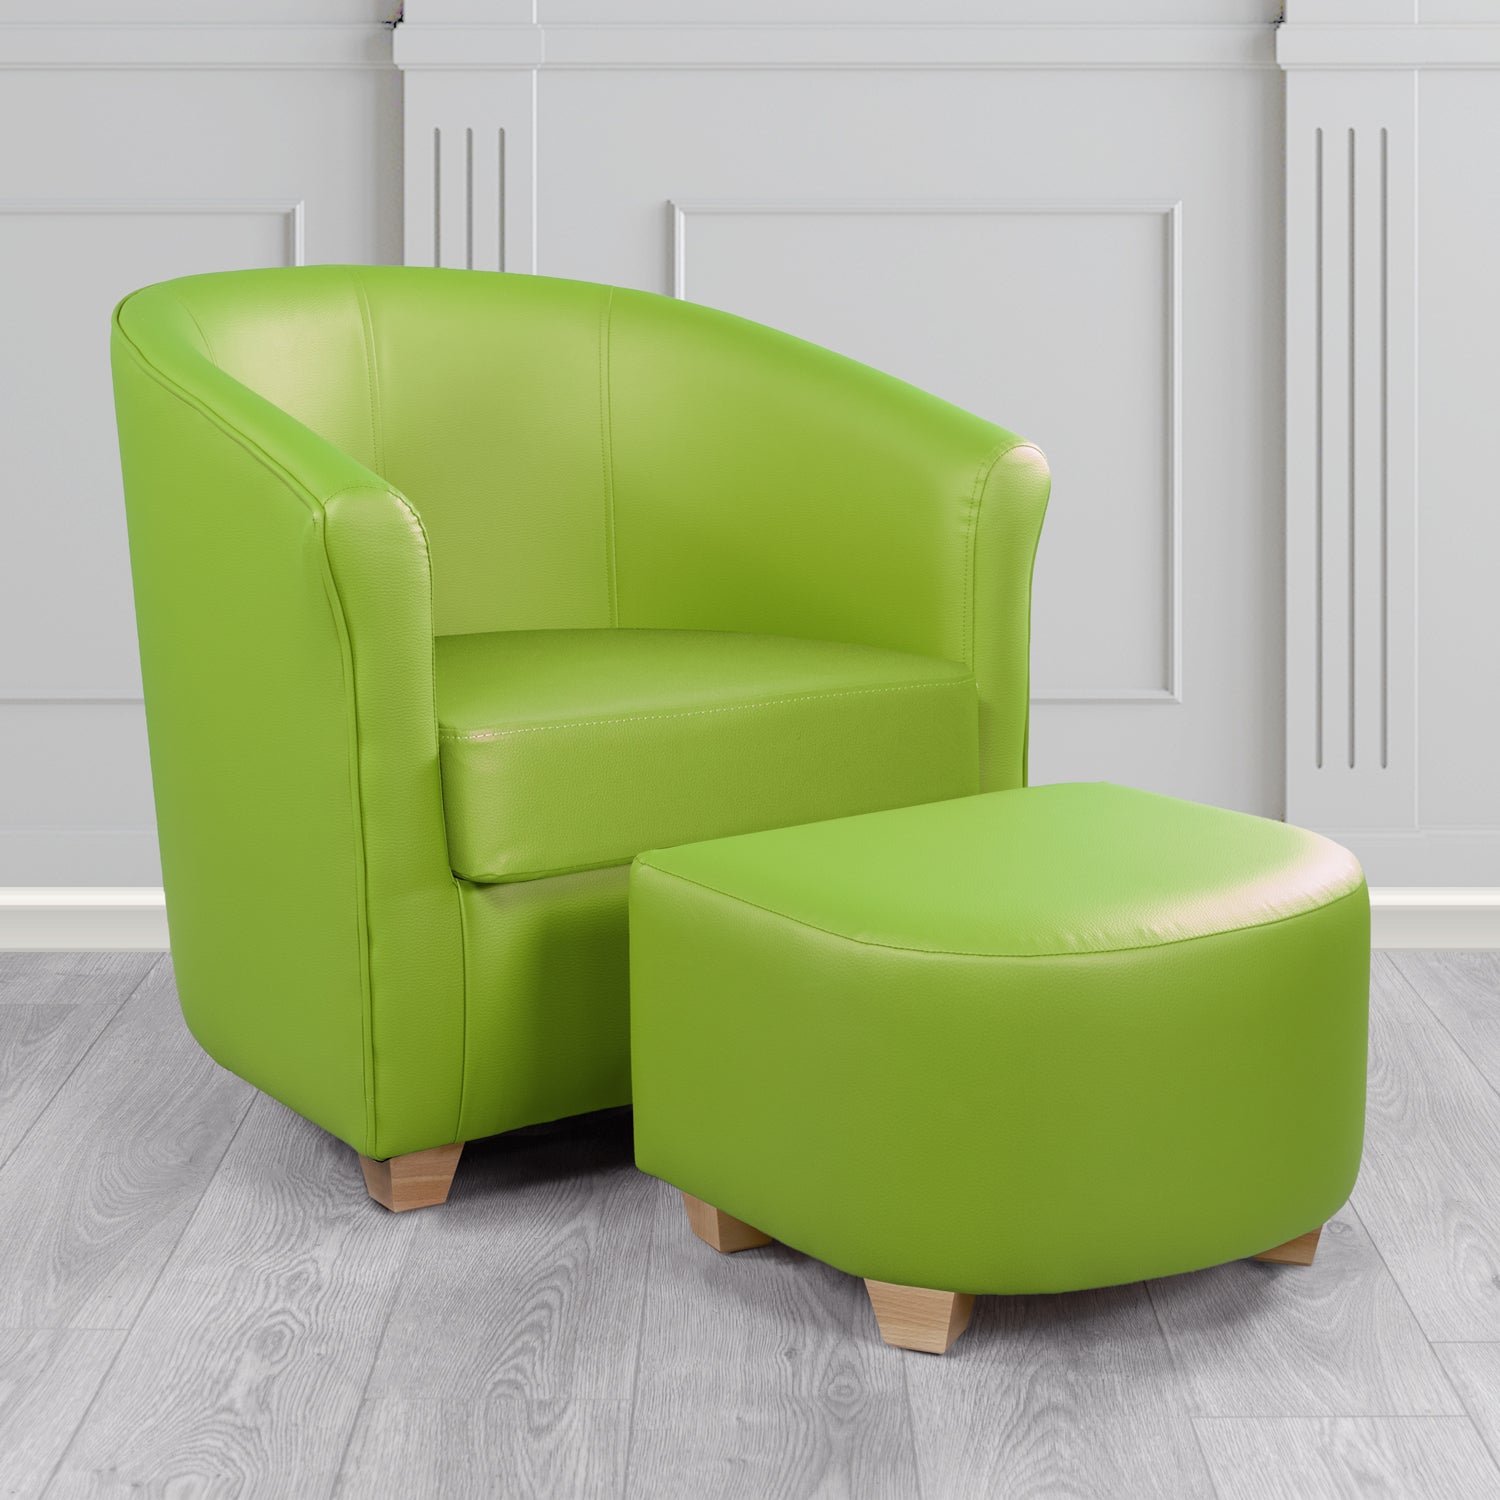 Cannes Tub Chair with Footstool Set in Just Colour Citrus Green Crib 5 Faux Leather - The Tub Chair Shop